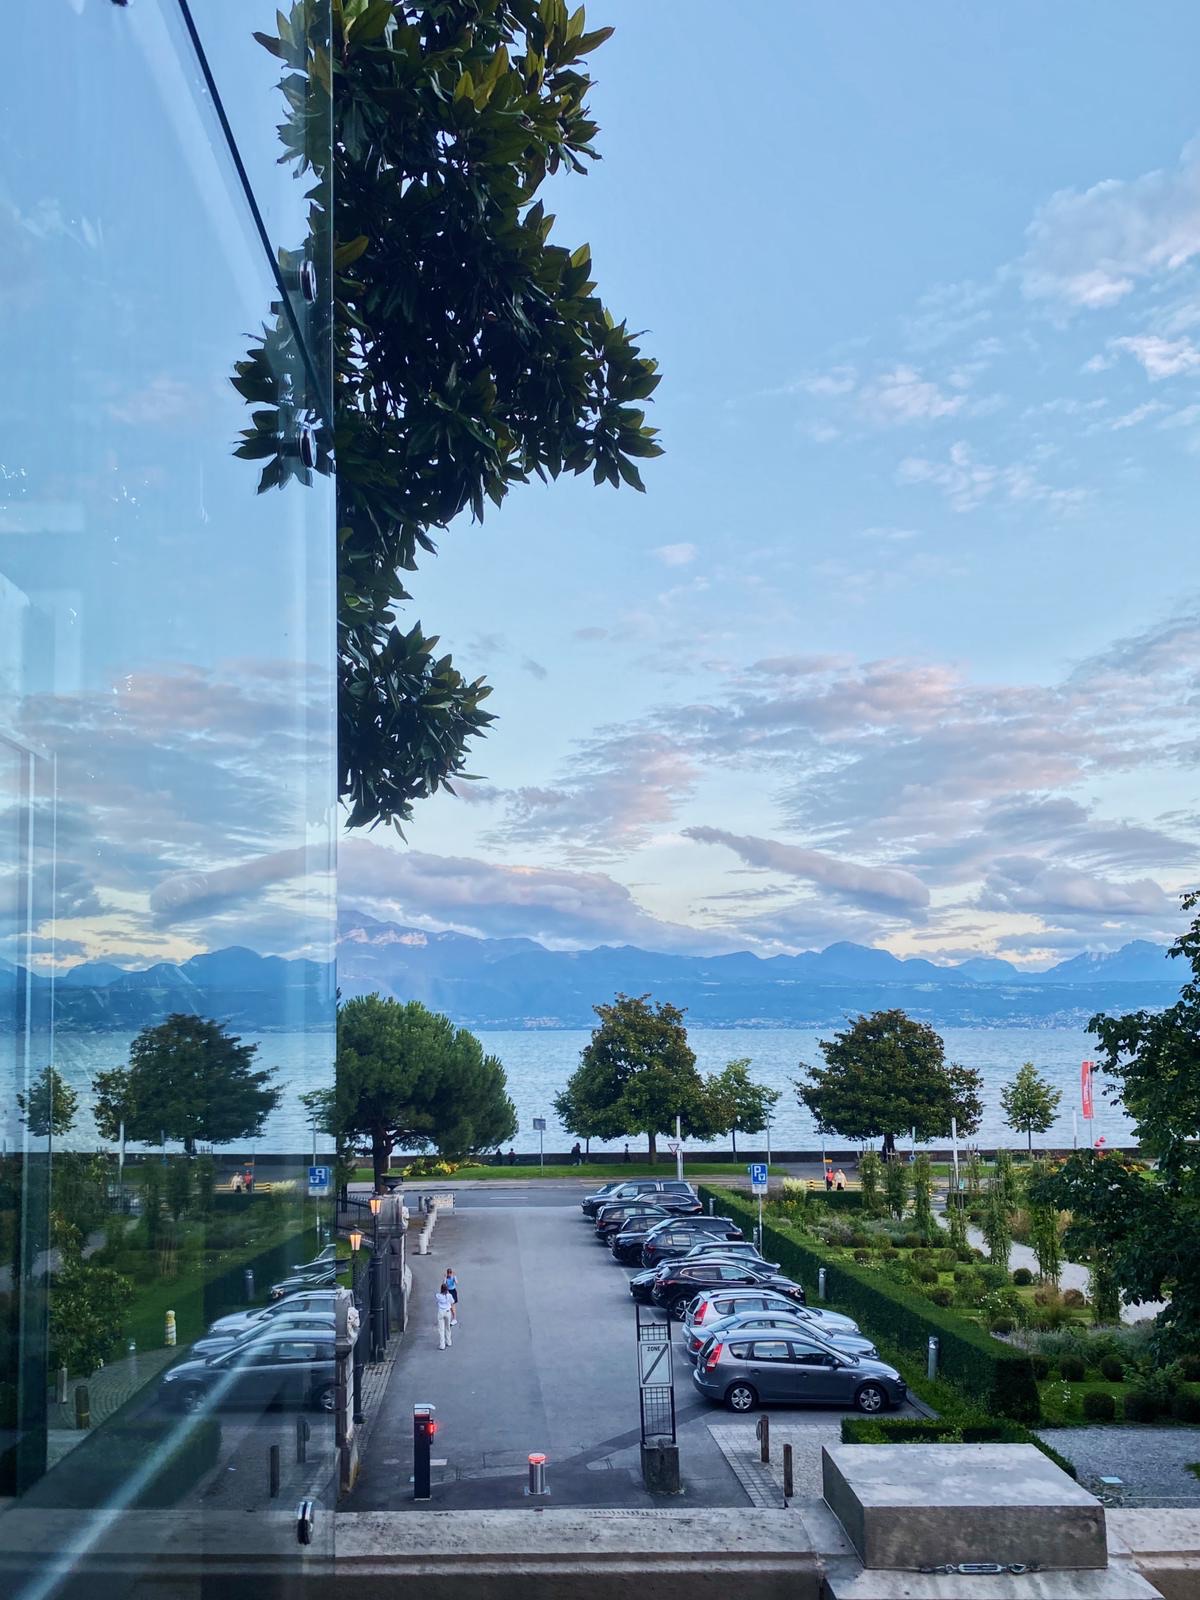 A view from Lausanne, Switzerland